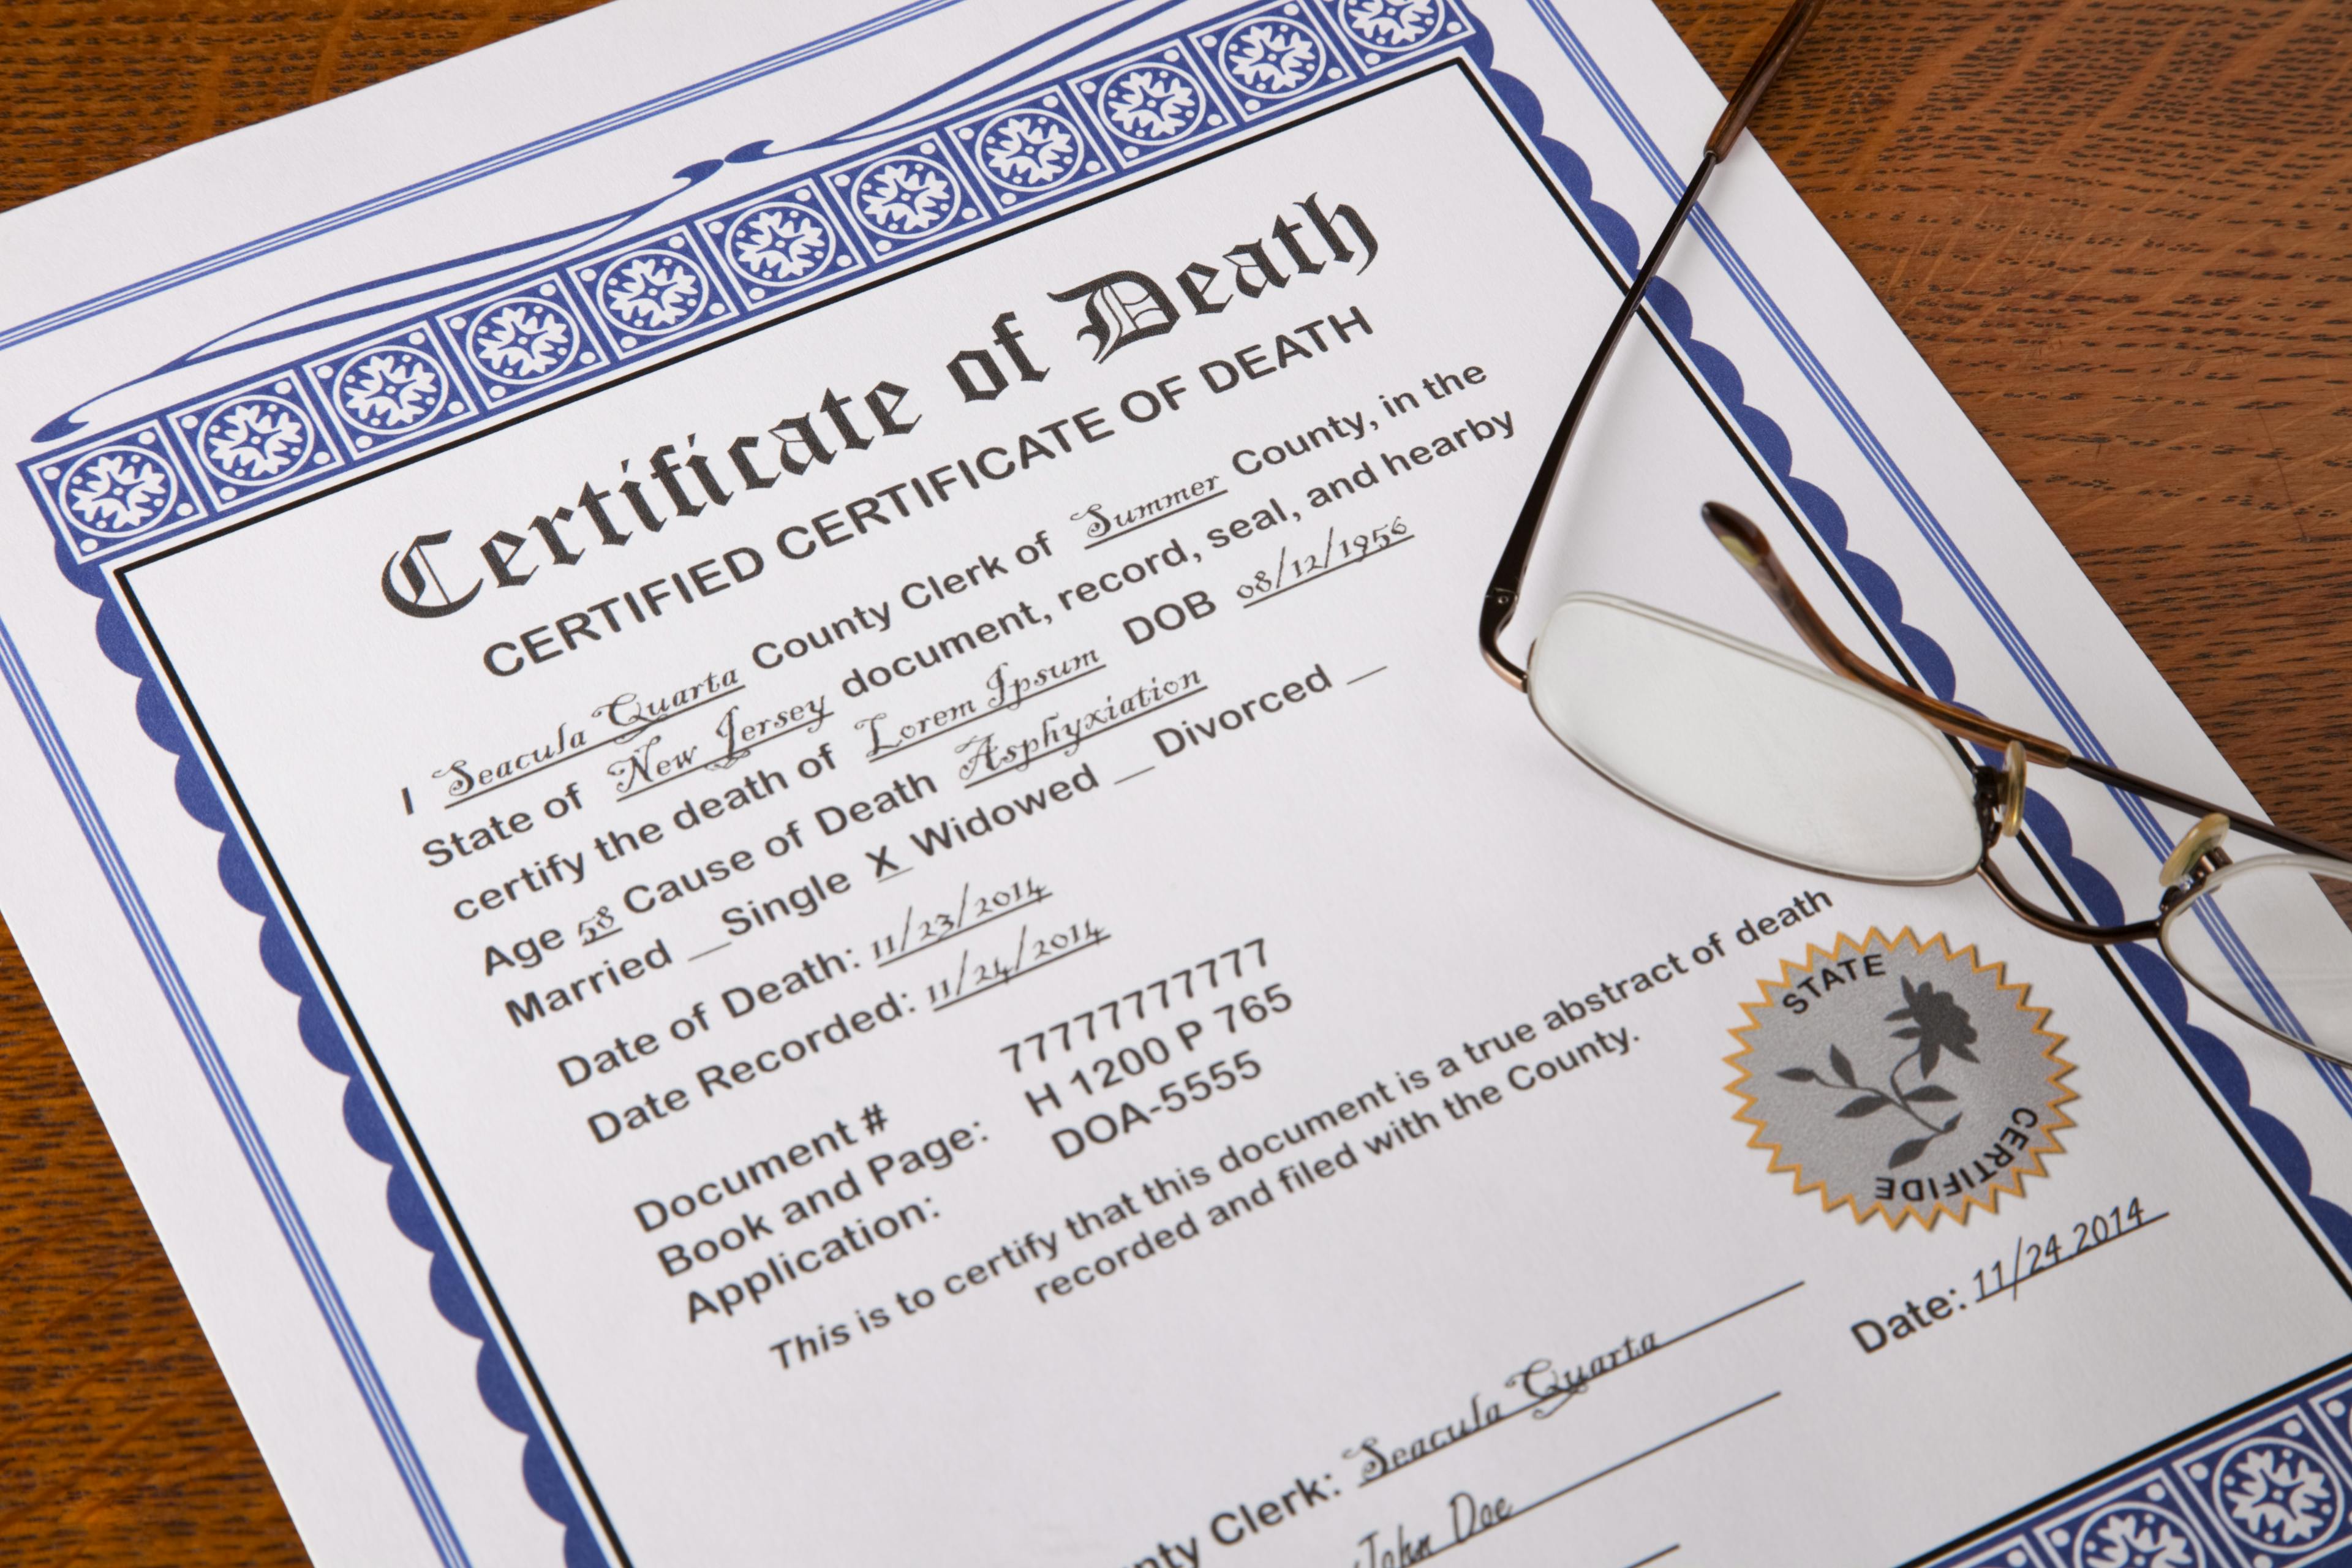 How to Obtain a Death Certificate in New York?